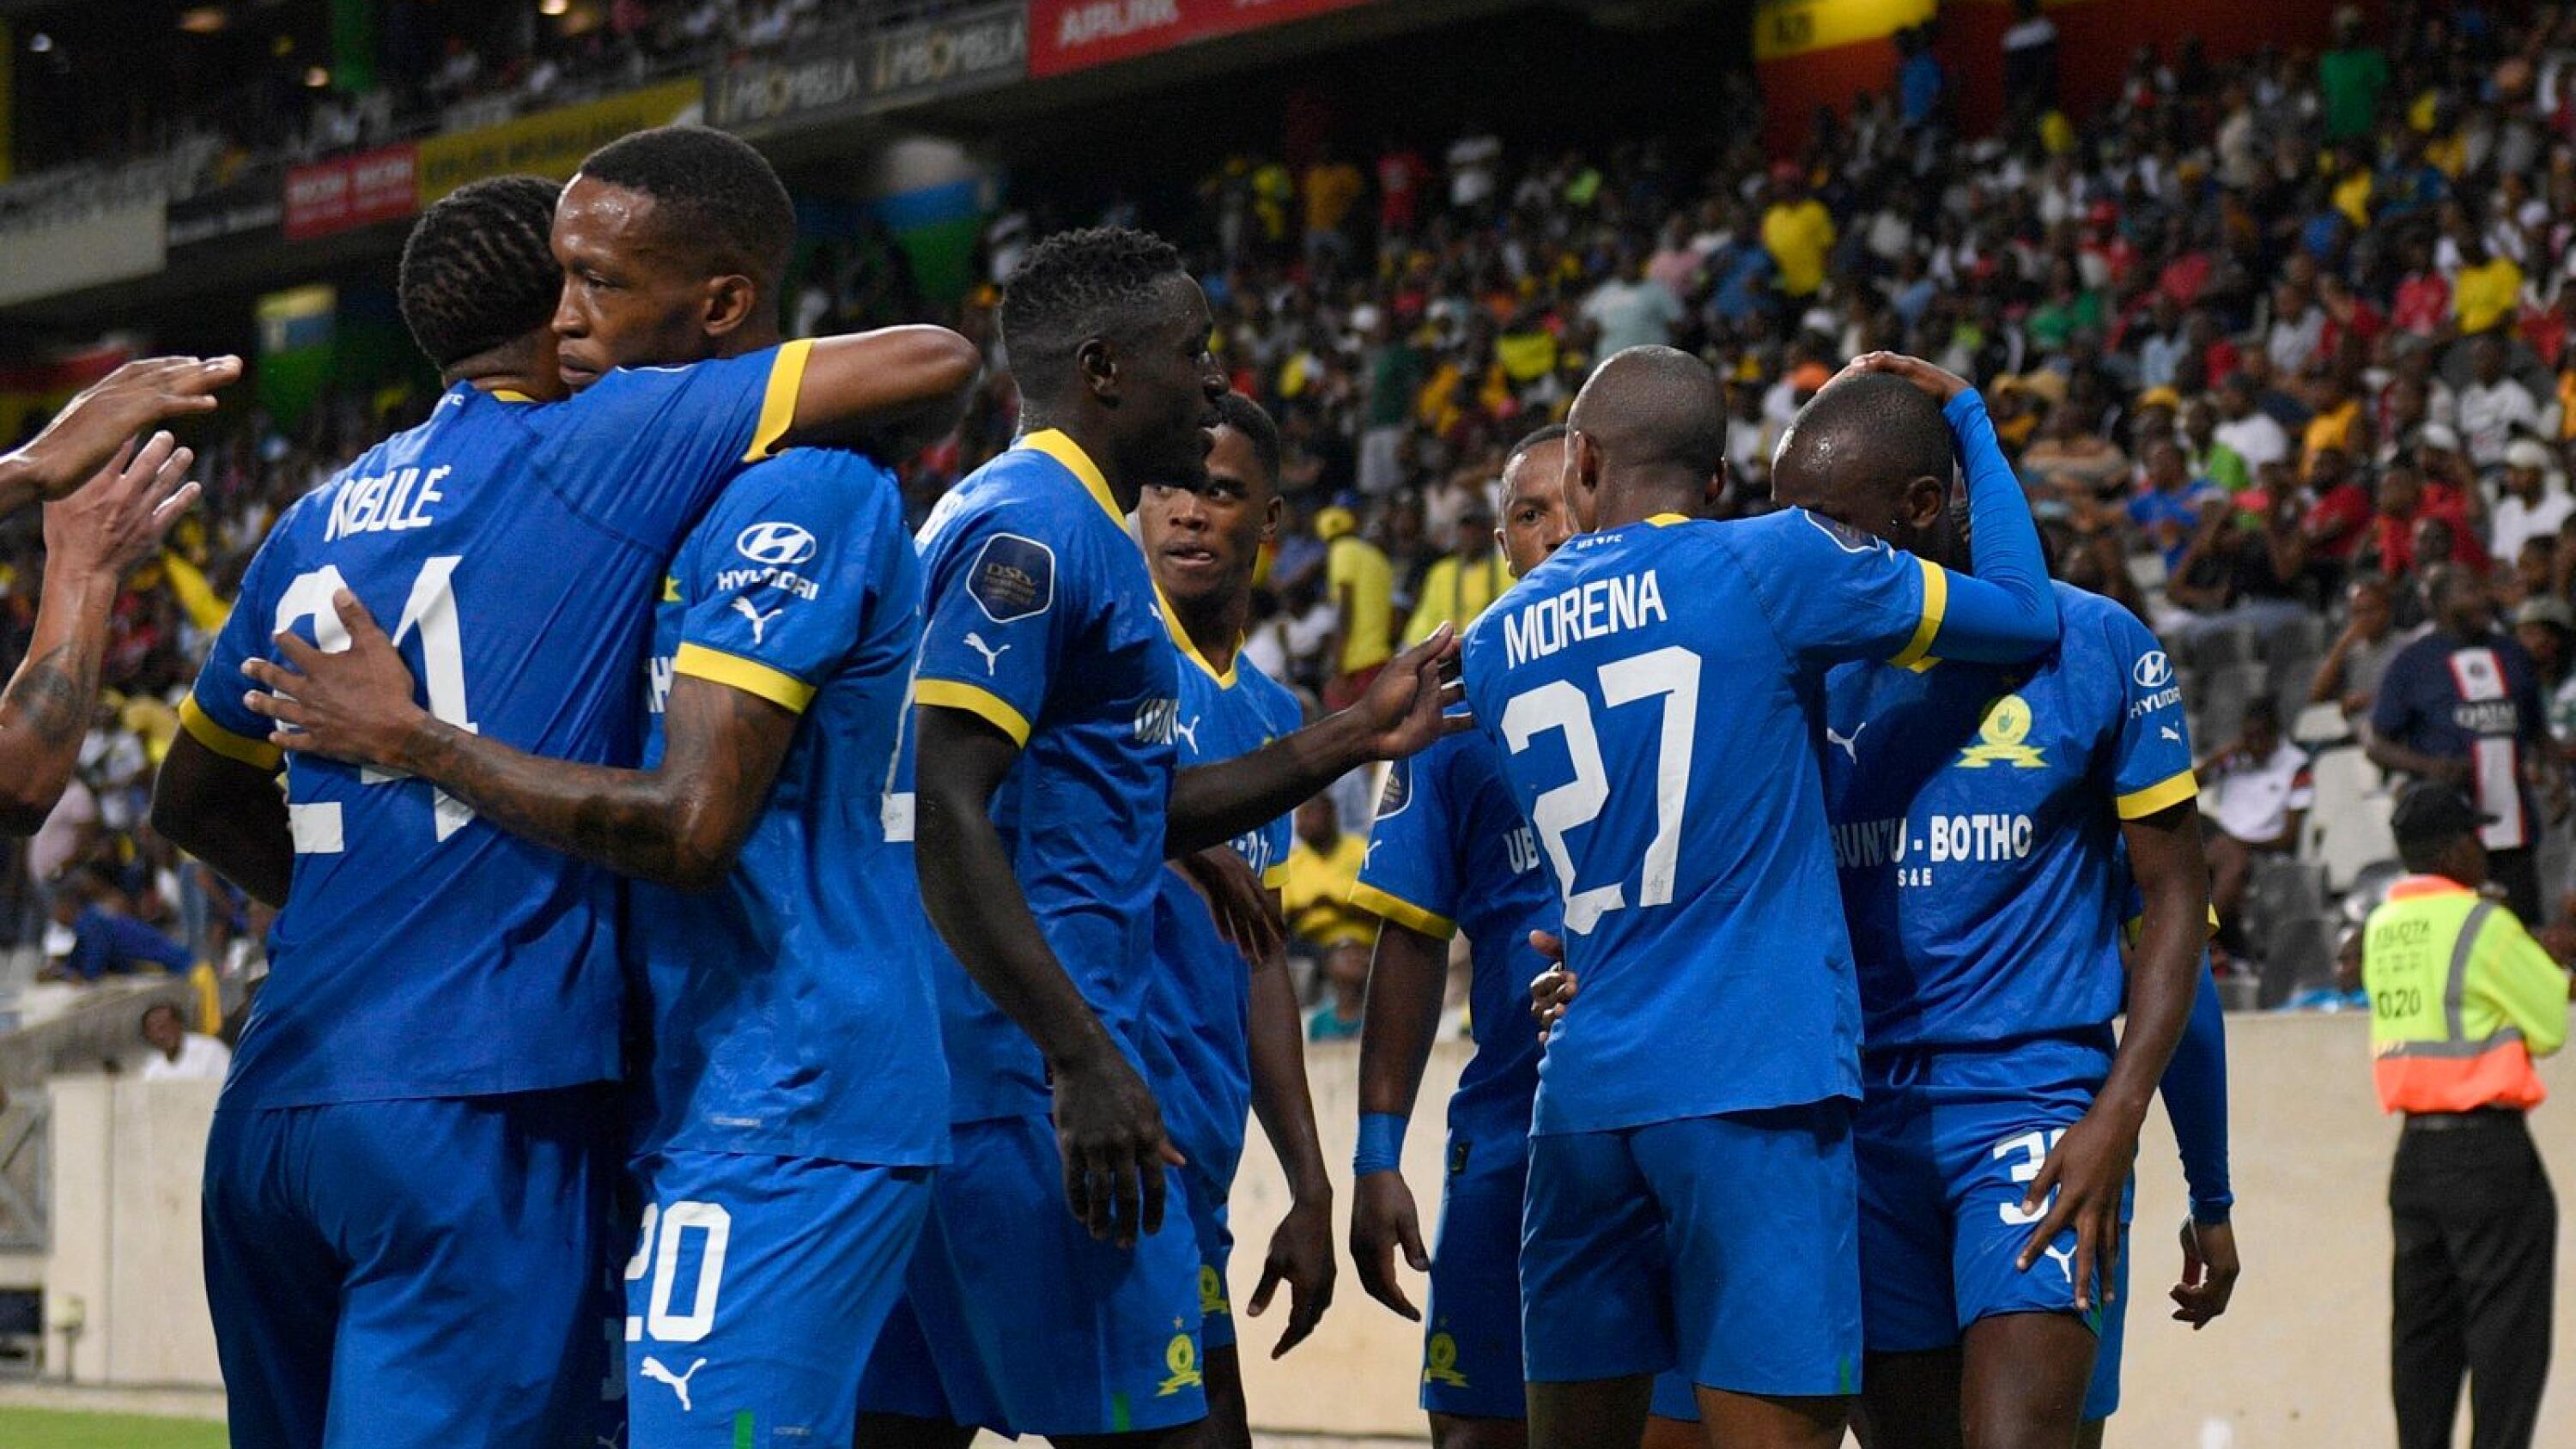 Mamelodi Sundowns’ Peter Shalulile celebrates with teammates after scoring a goal during their DStv Premiership game against TS Galaxy FC at Mbombela Stadium in Mbombela on Tuesday